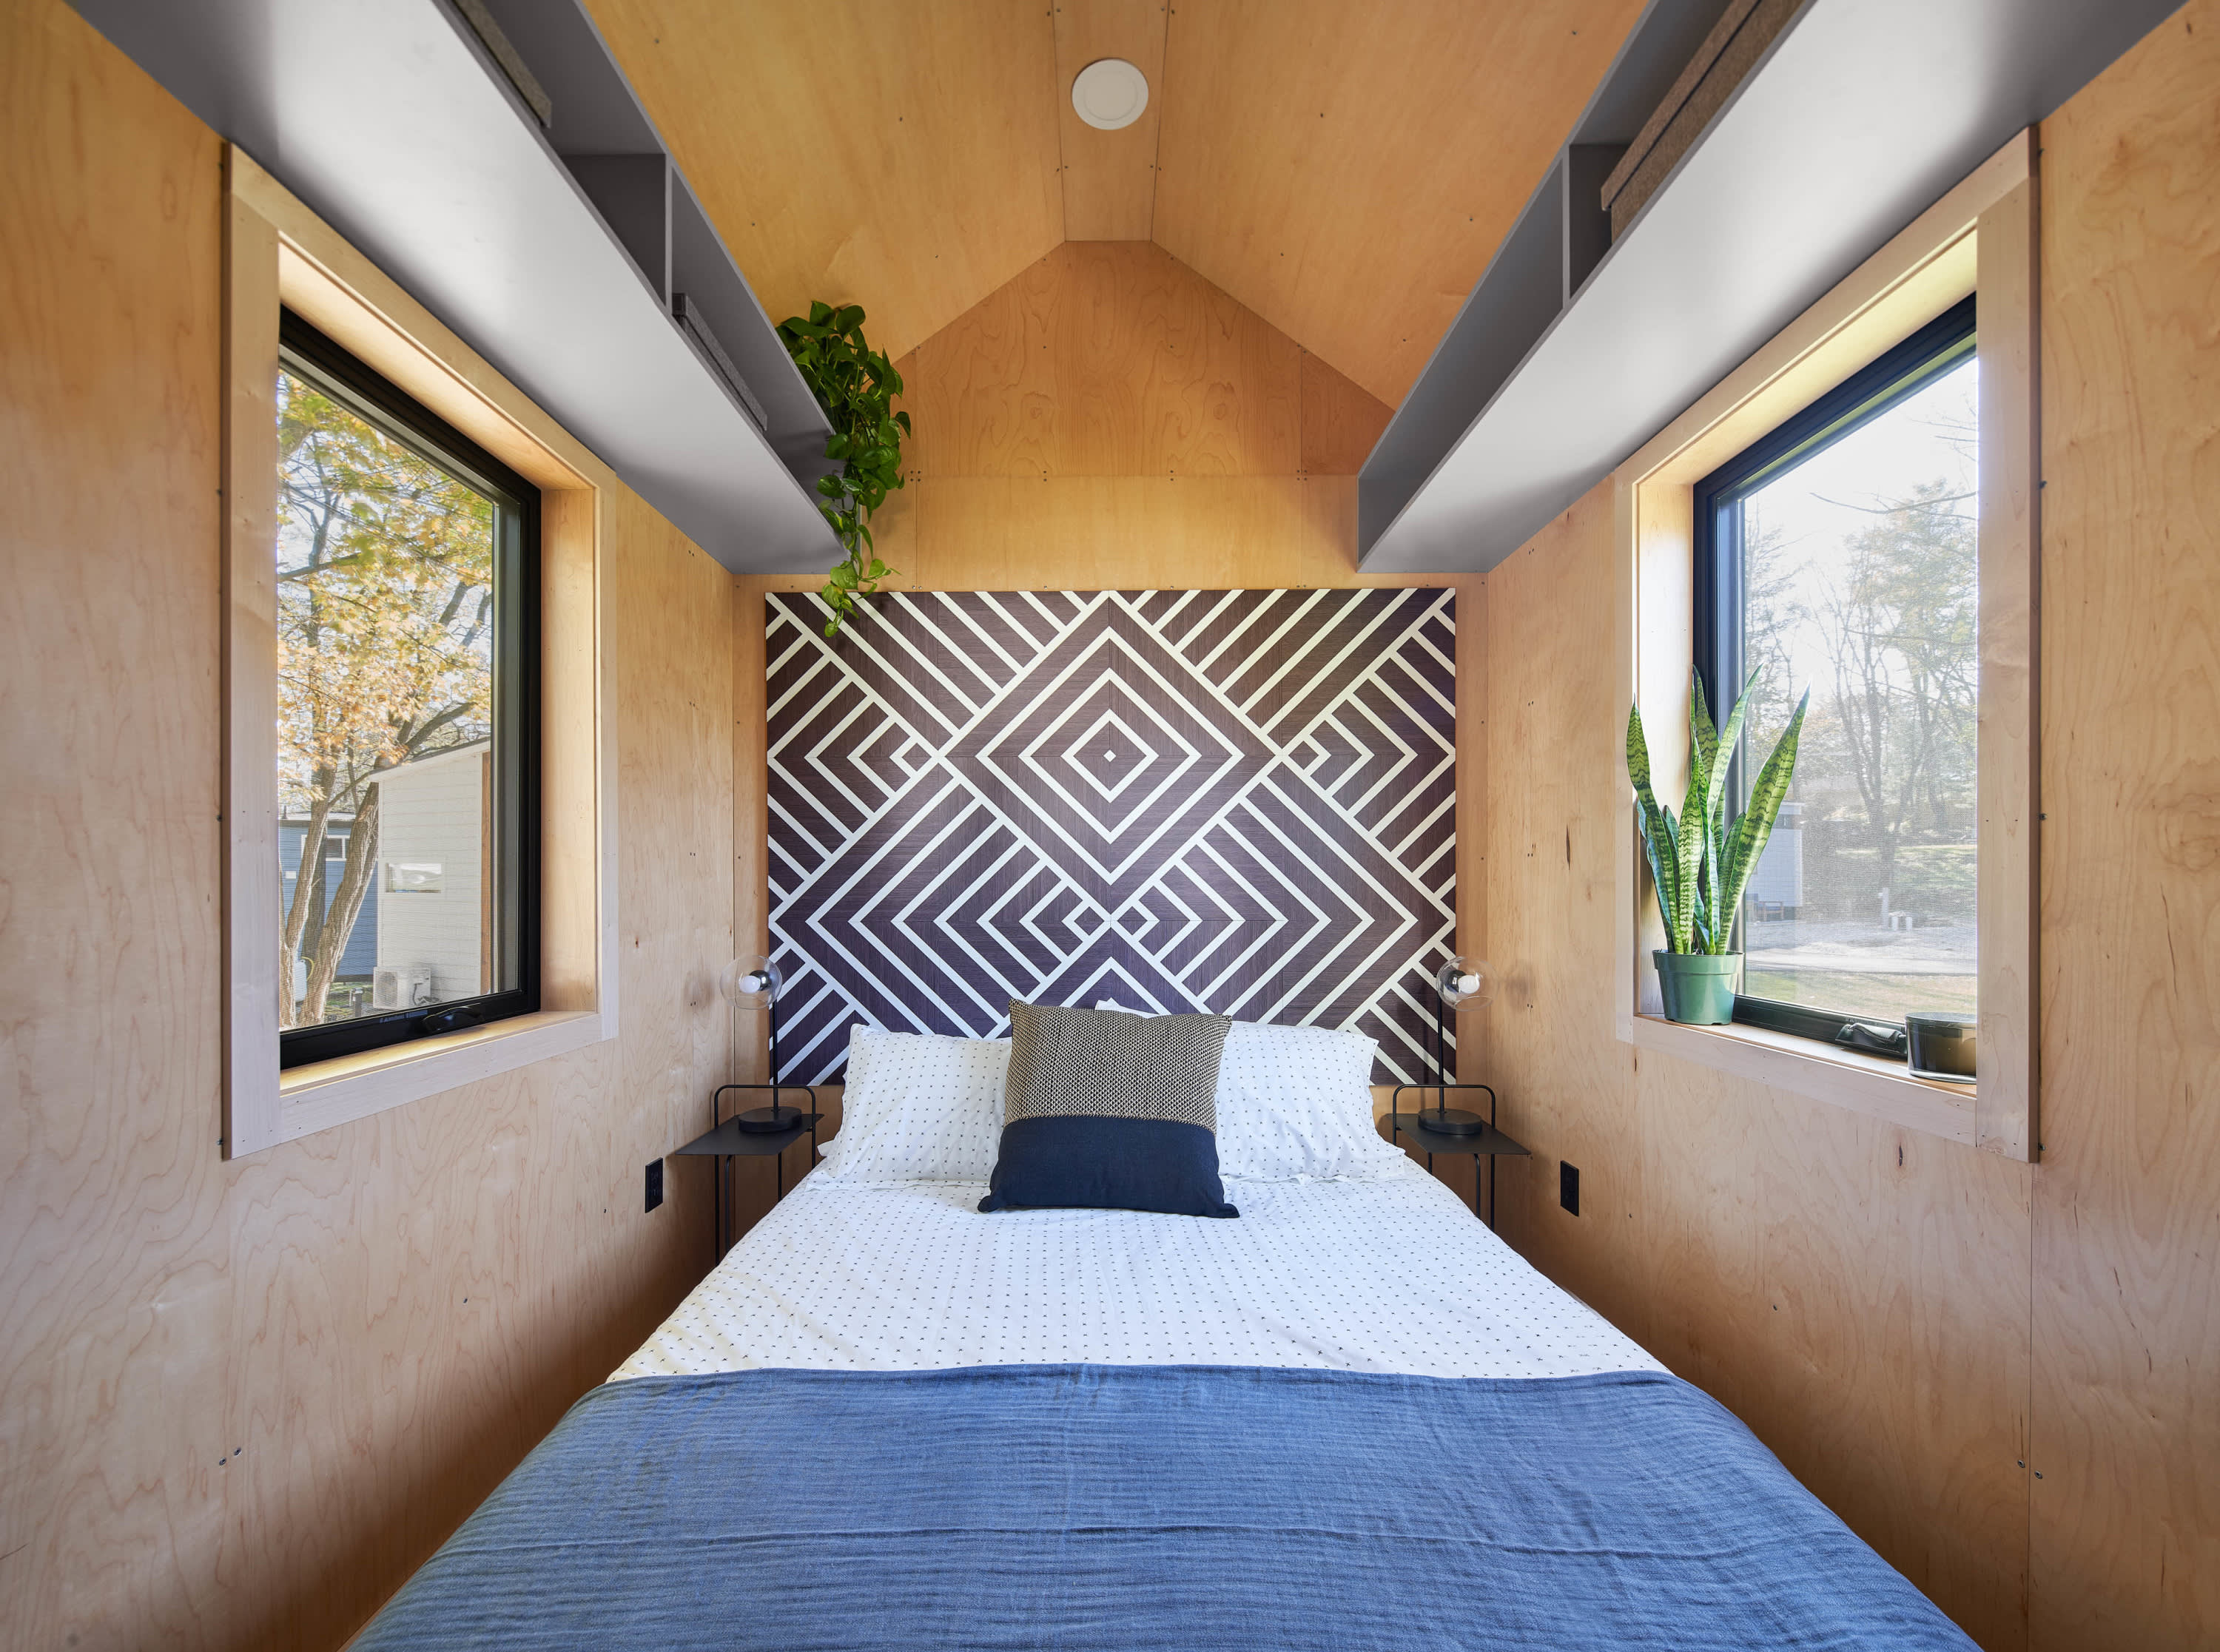 Modular Housing’s Potential Unleashed By Innovative Process And Design